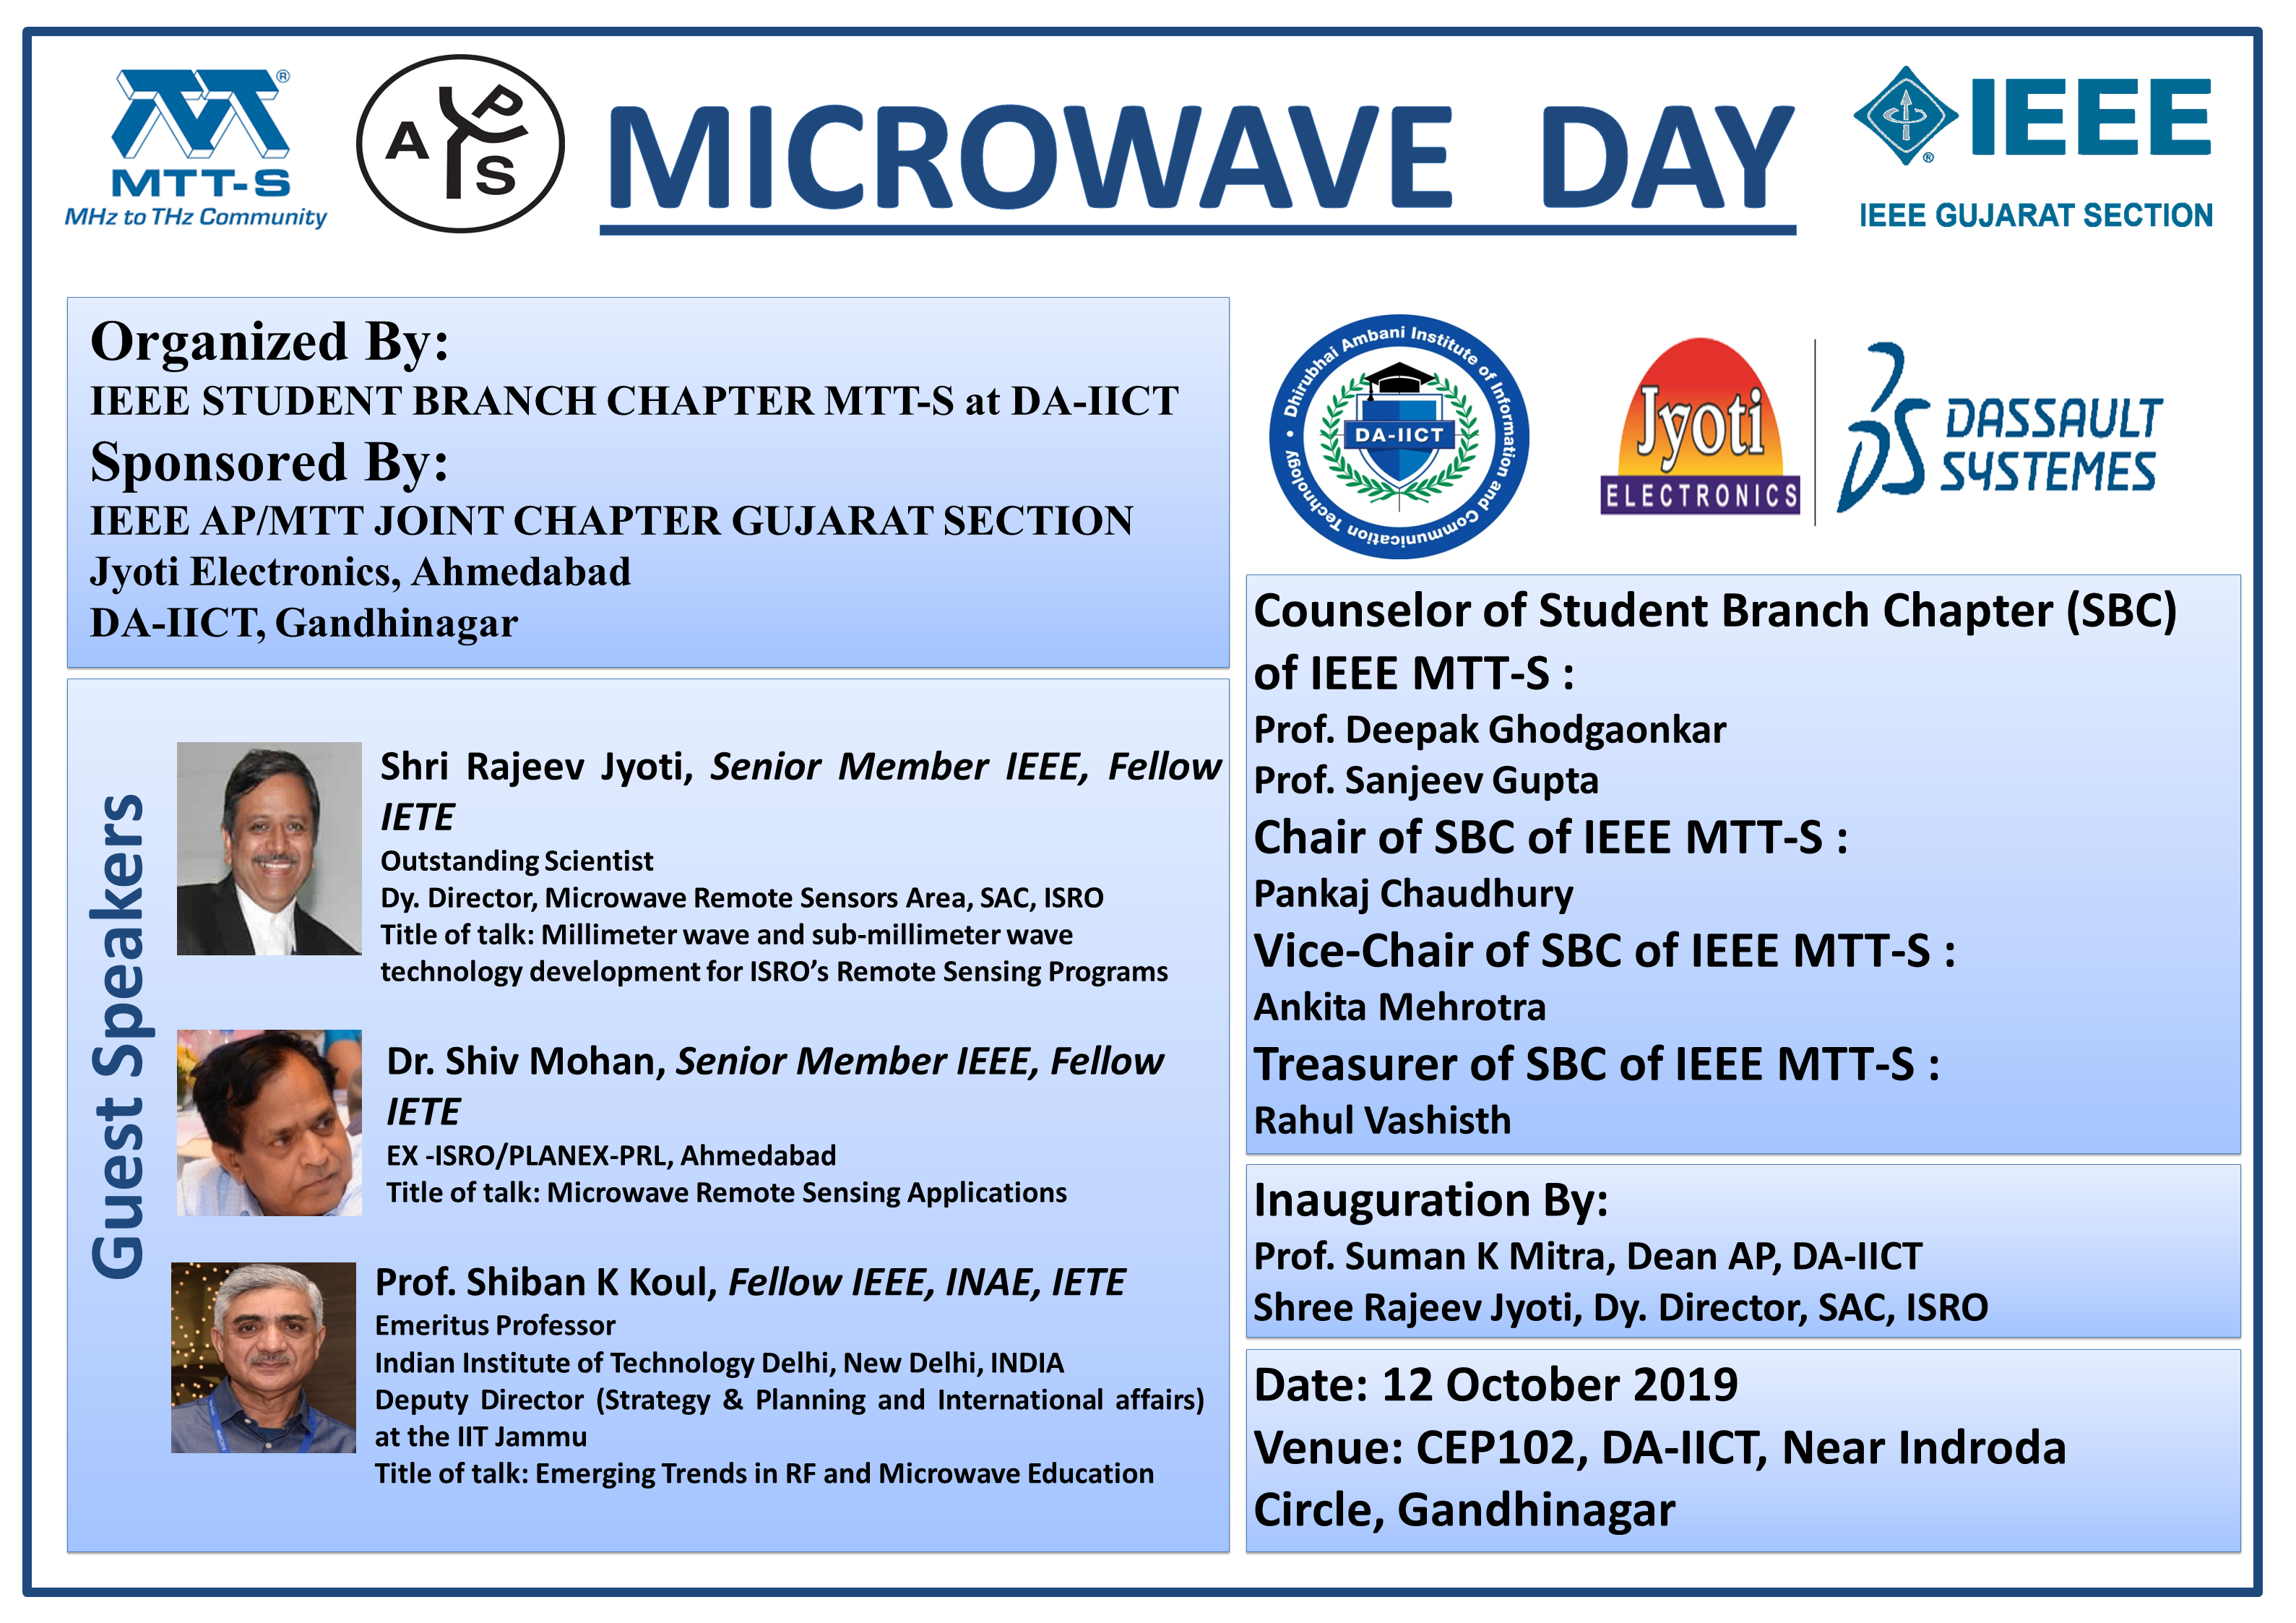 Microwave Day 2019